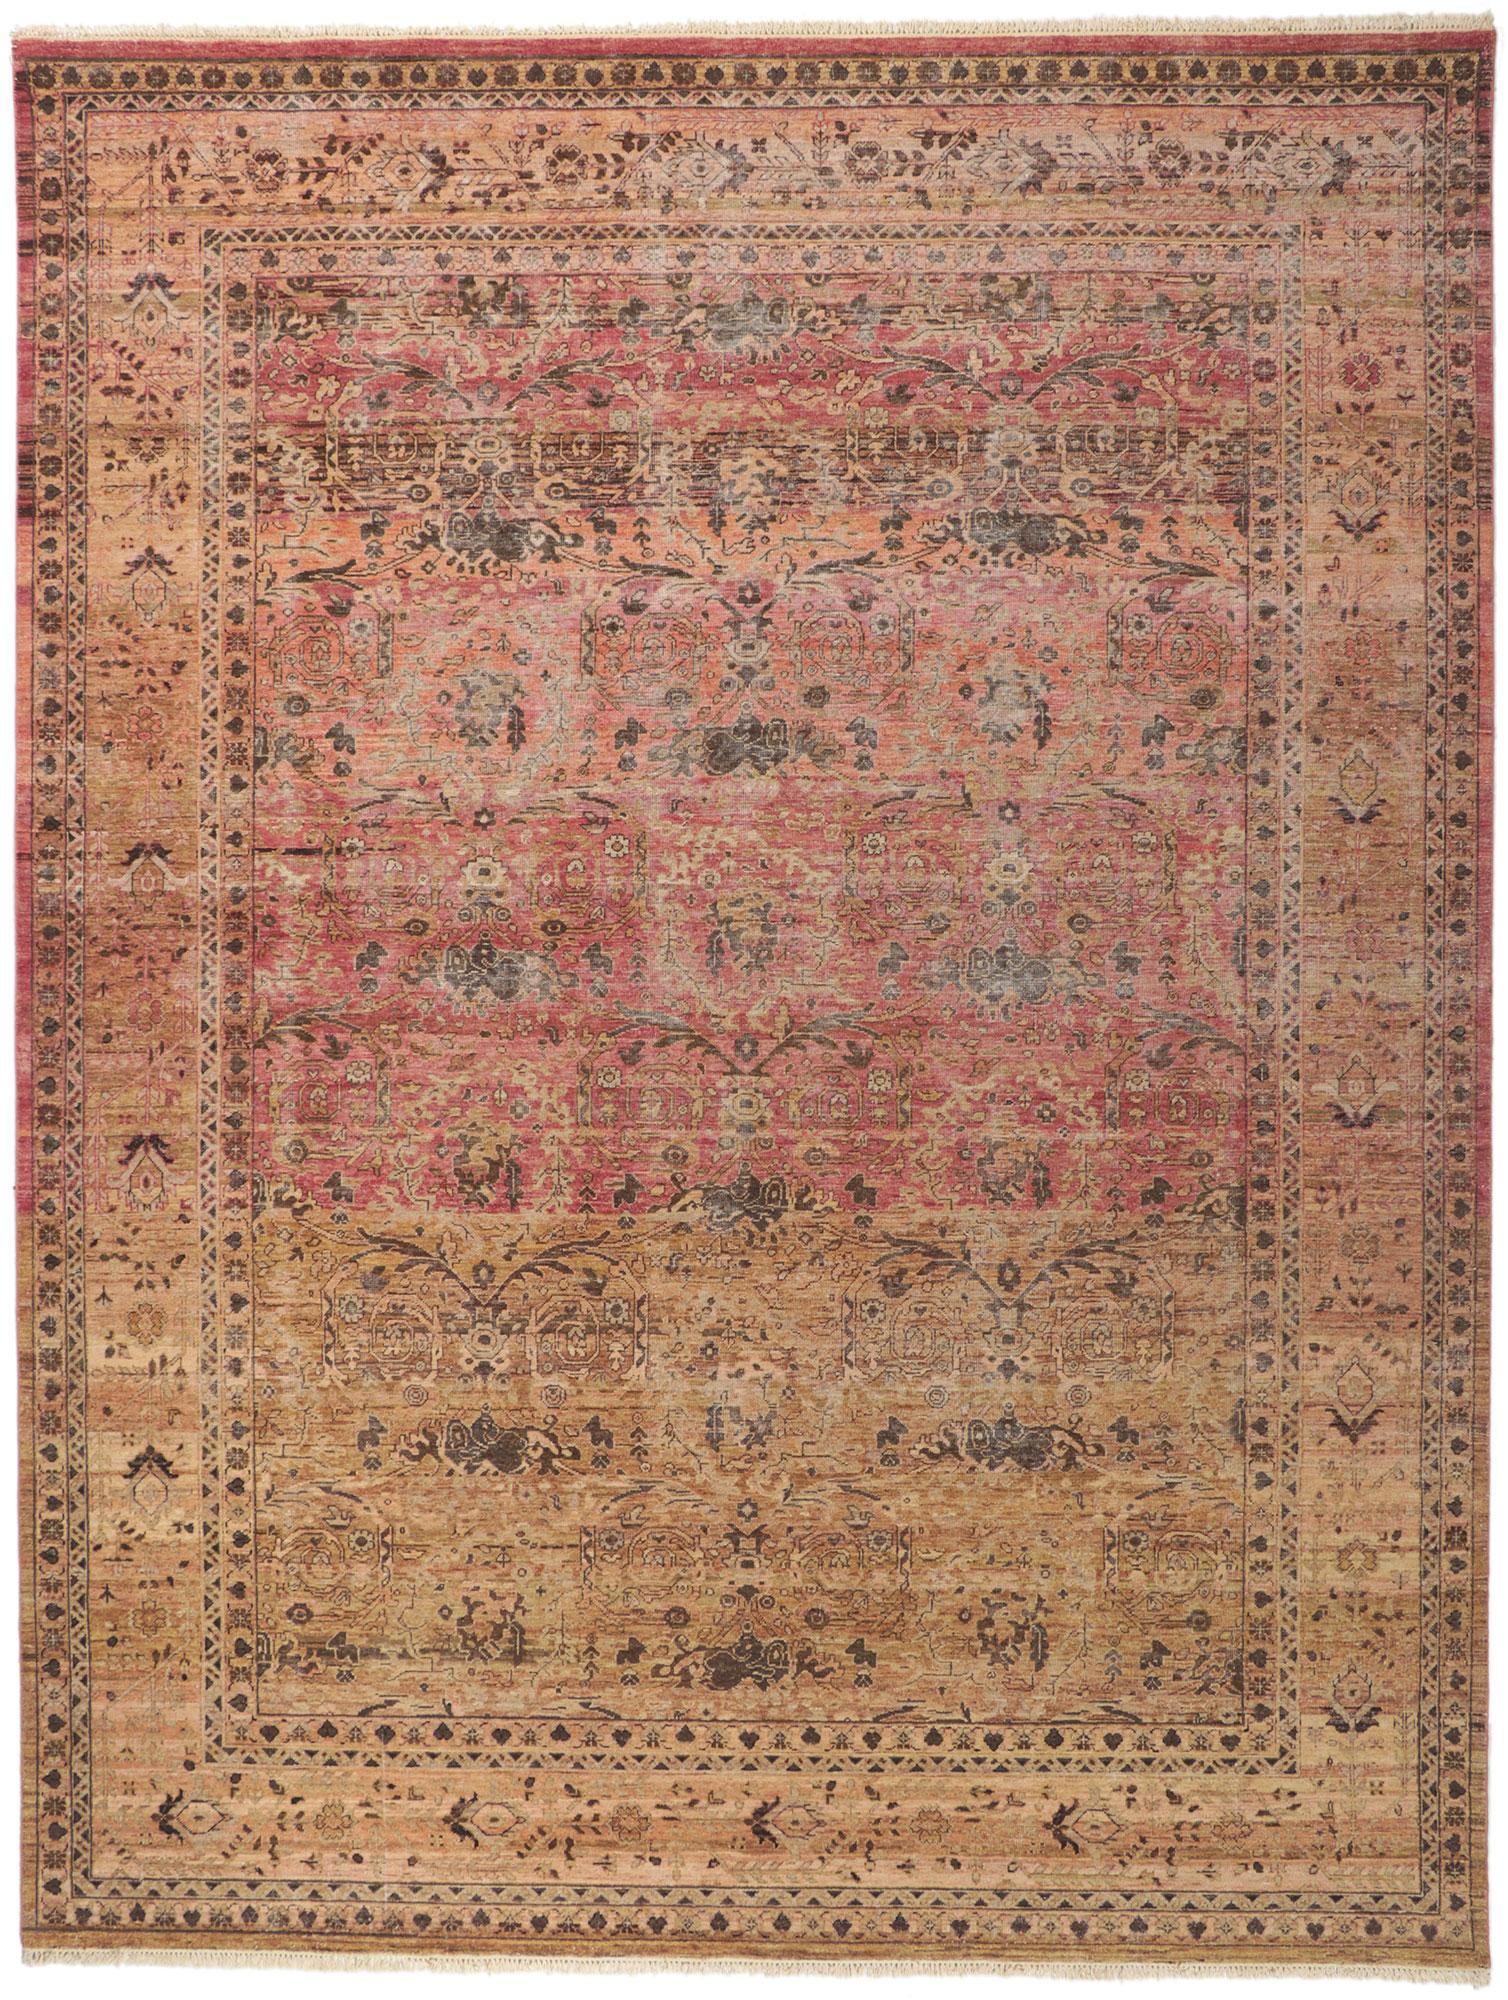 New Vintage-Style Distressed Rug with Rustic Earth-Tone Colors For Sale 2